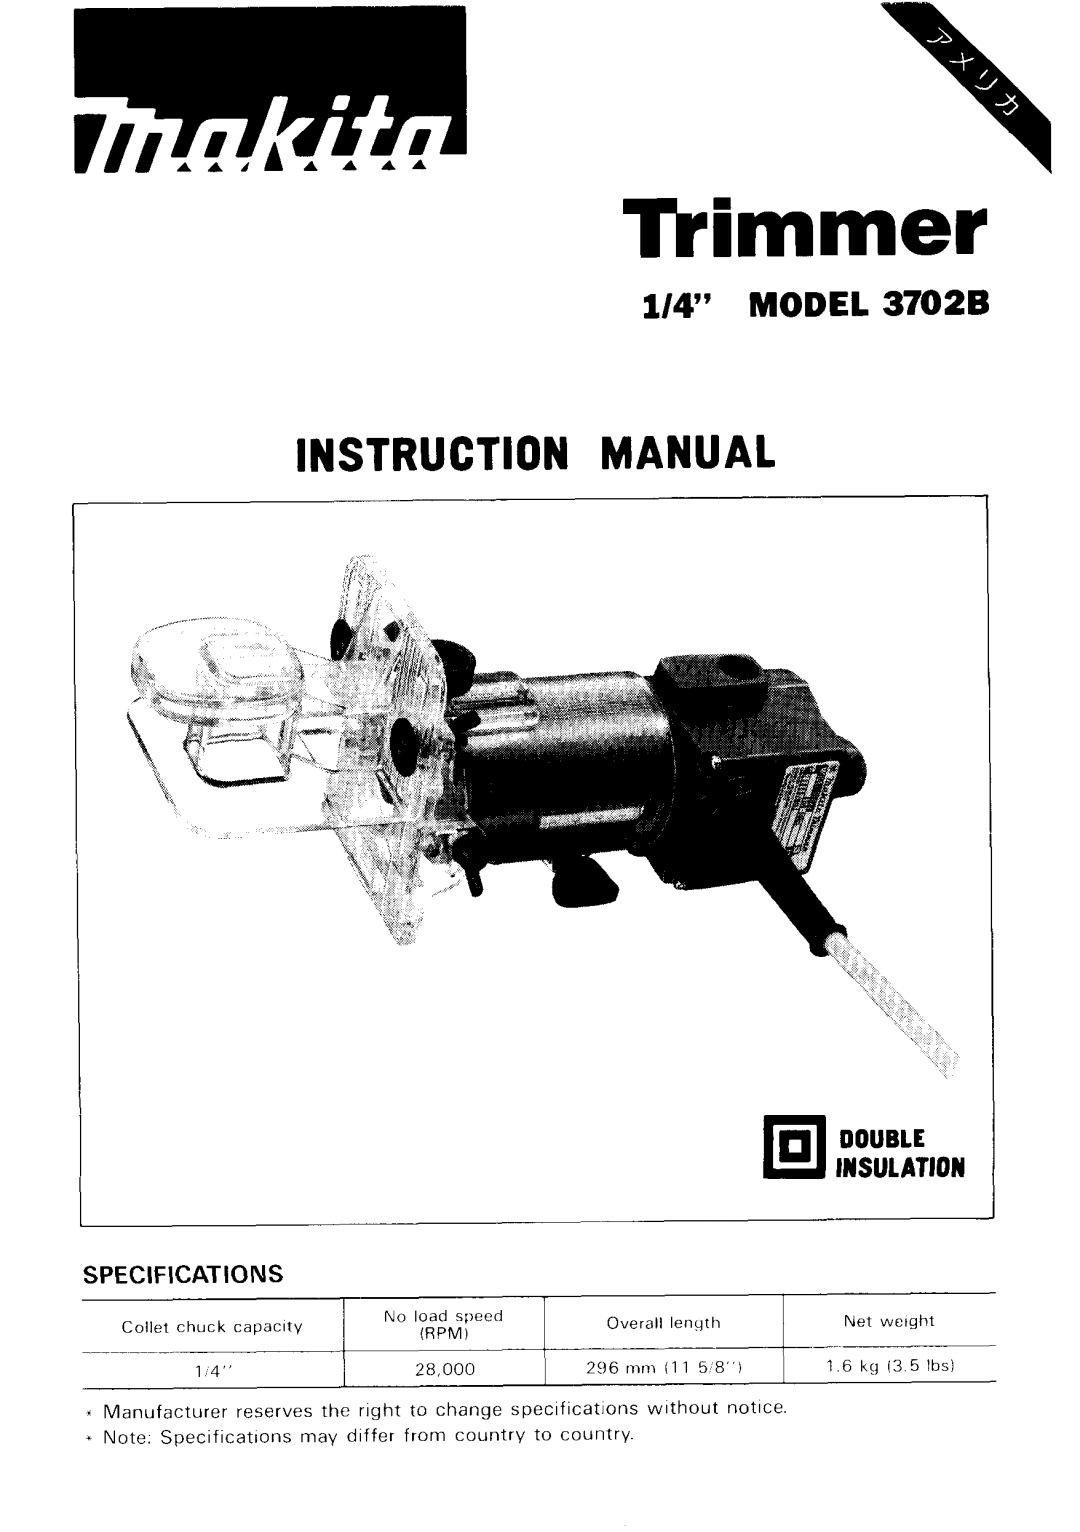 Makita instruction manual 1/4” MODEL 3702B, Tkimmer, Instruction Manual, Double, Specifications, Insulation, Rpmi, ~ ~ 